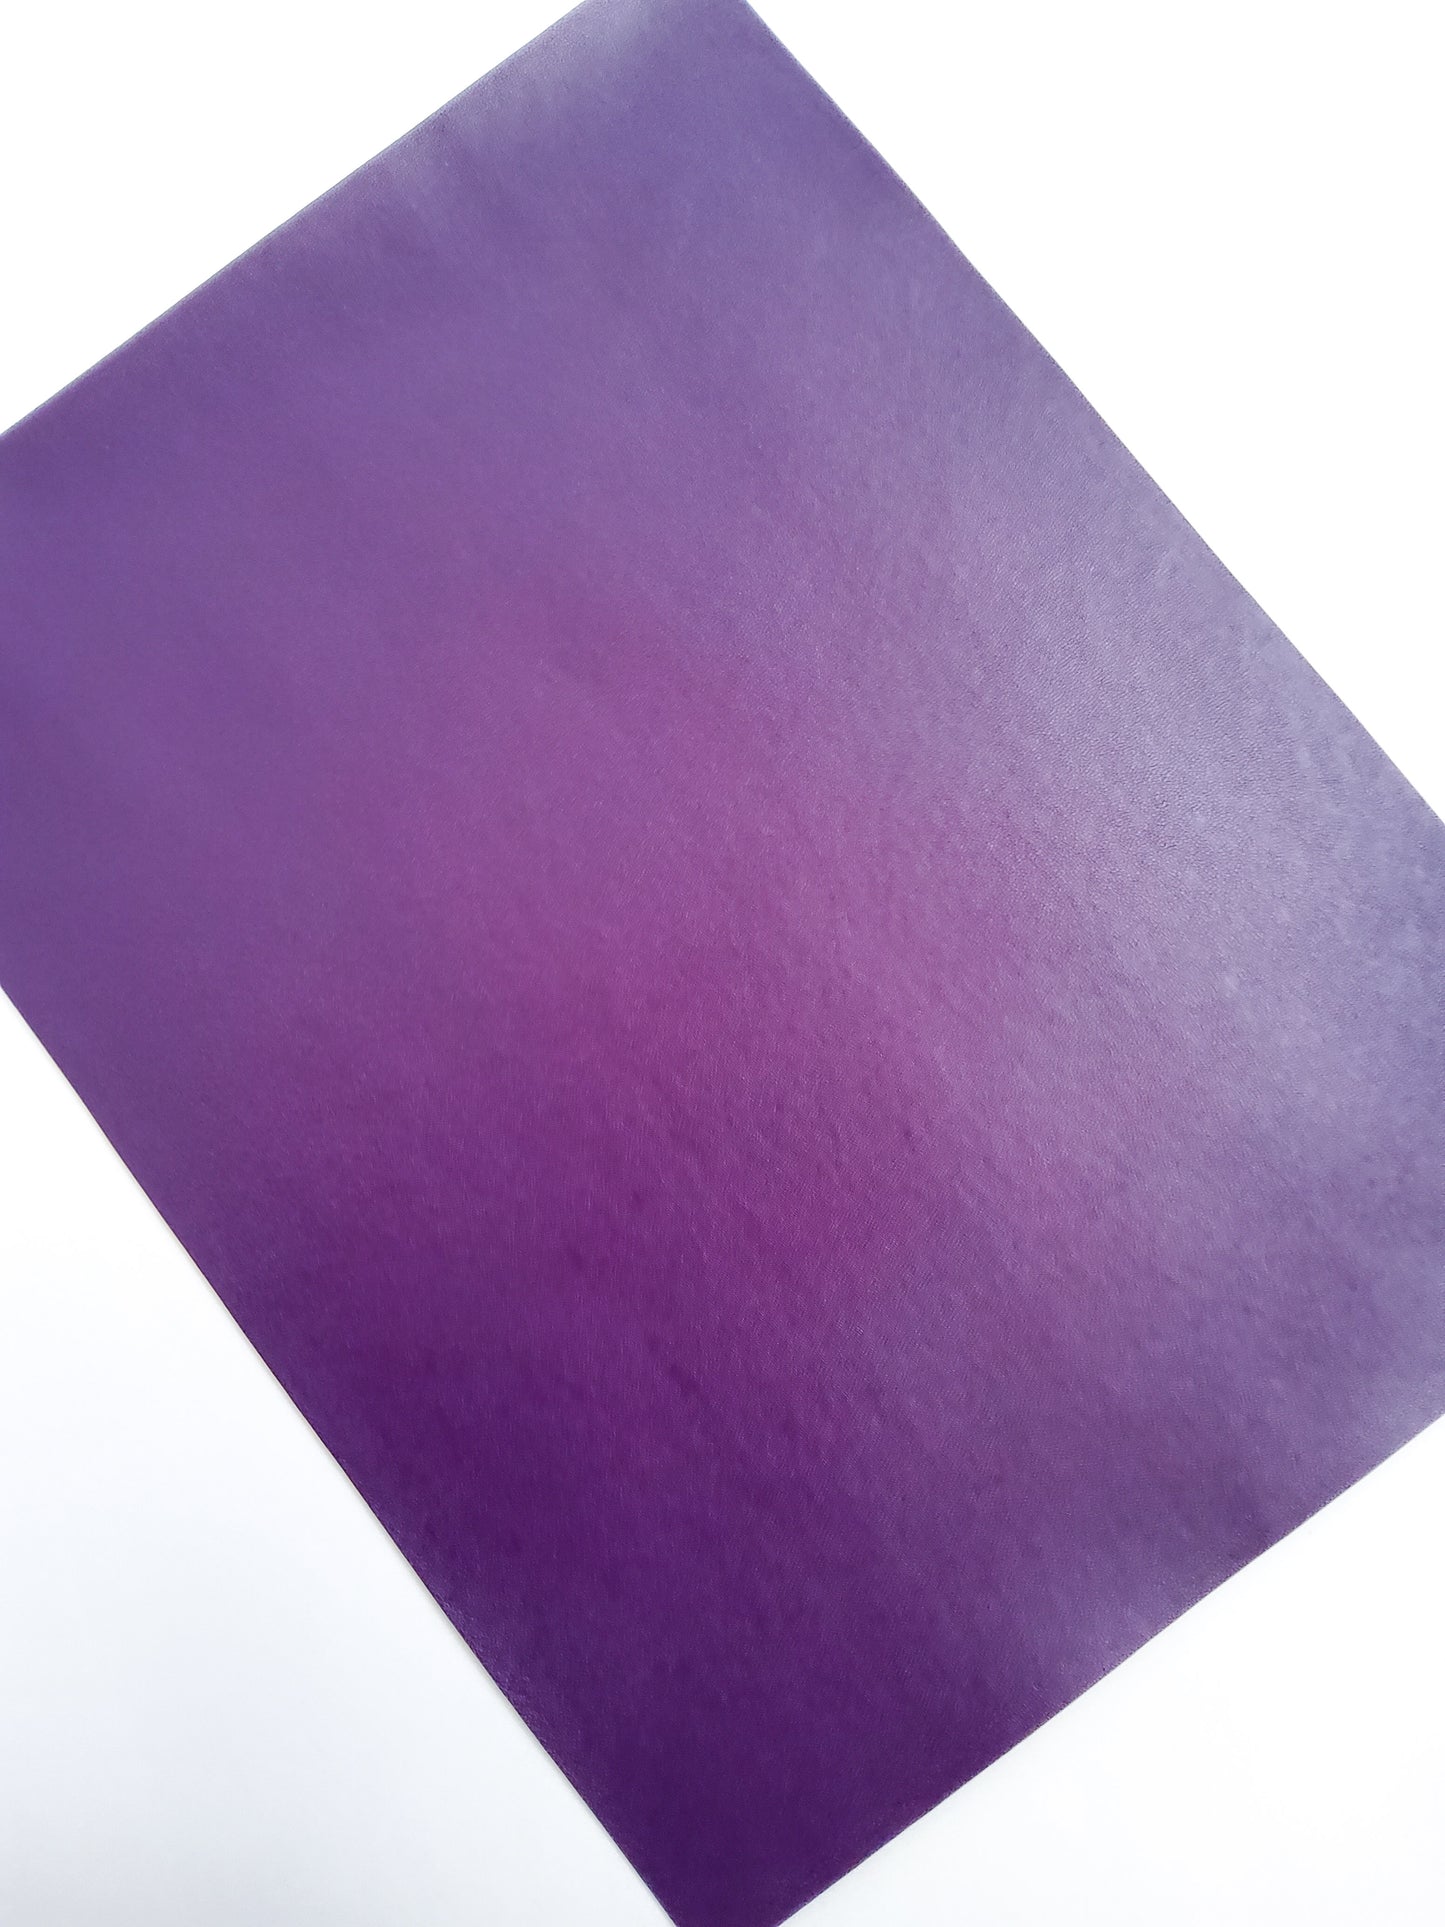 Deep Purple Smooth 9x12 faux leather sheet